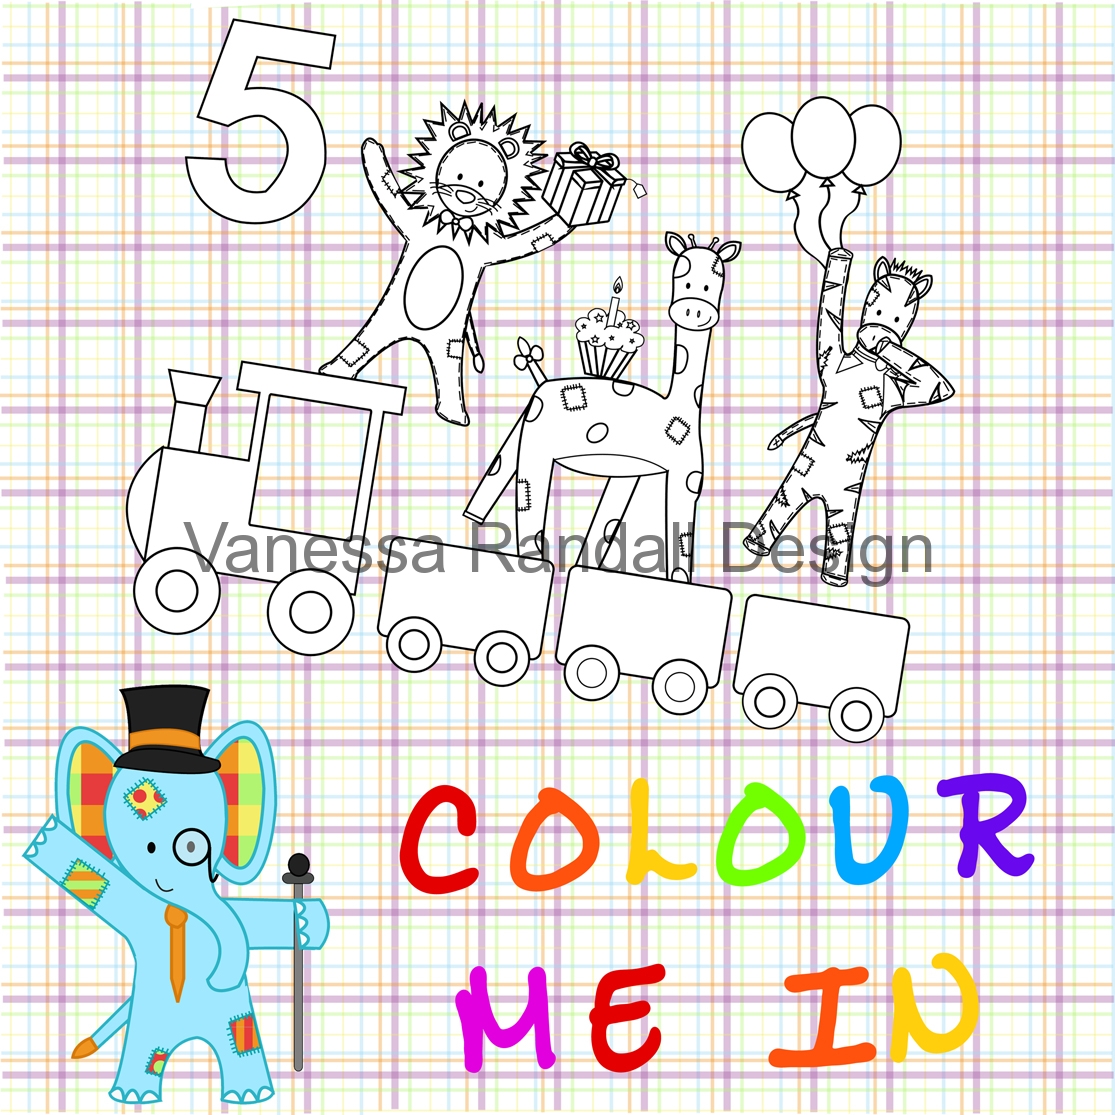 Colour me in page